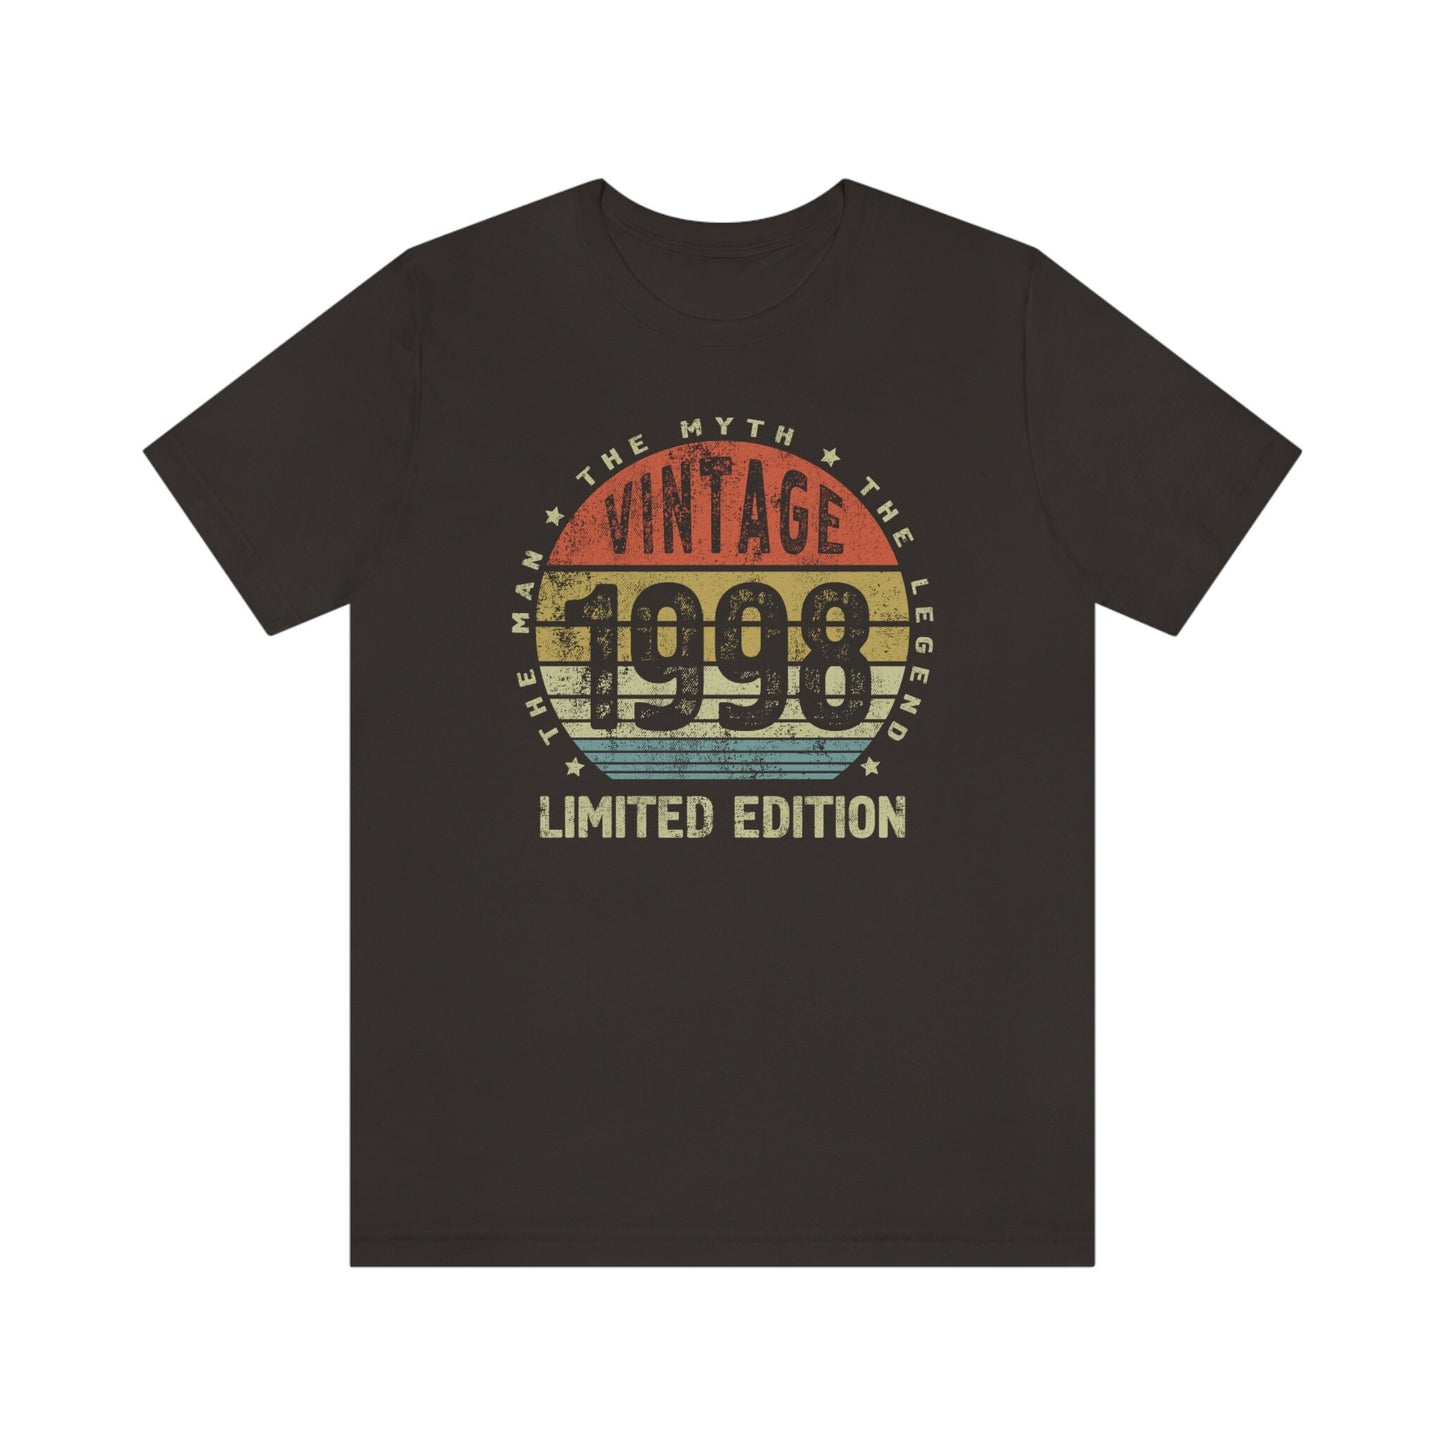 Vintage 1998 Birthday shirt for son or brother, 25 anniversary t-shirt